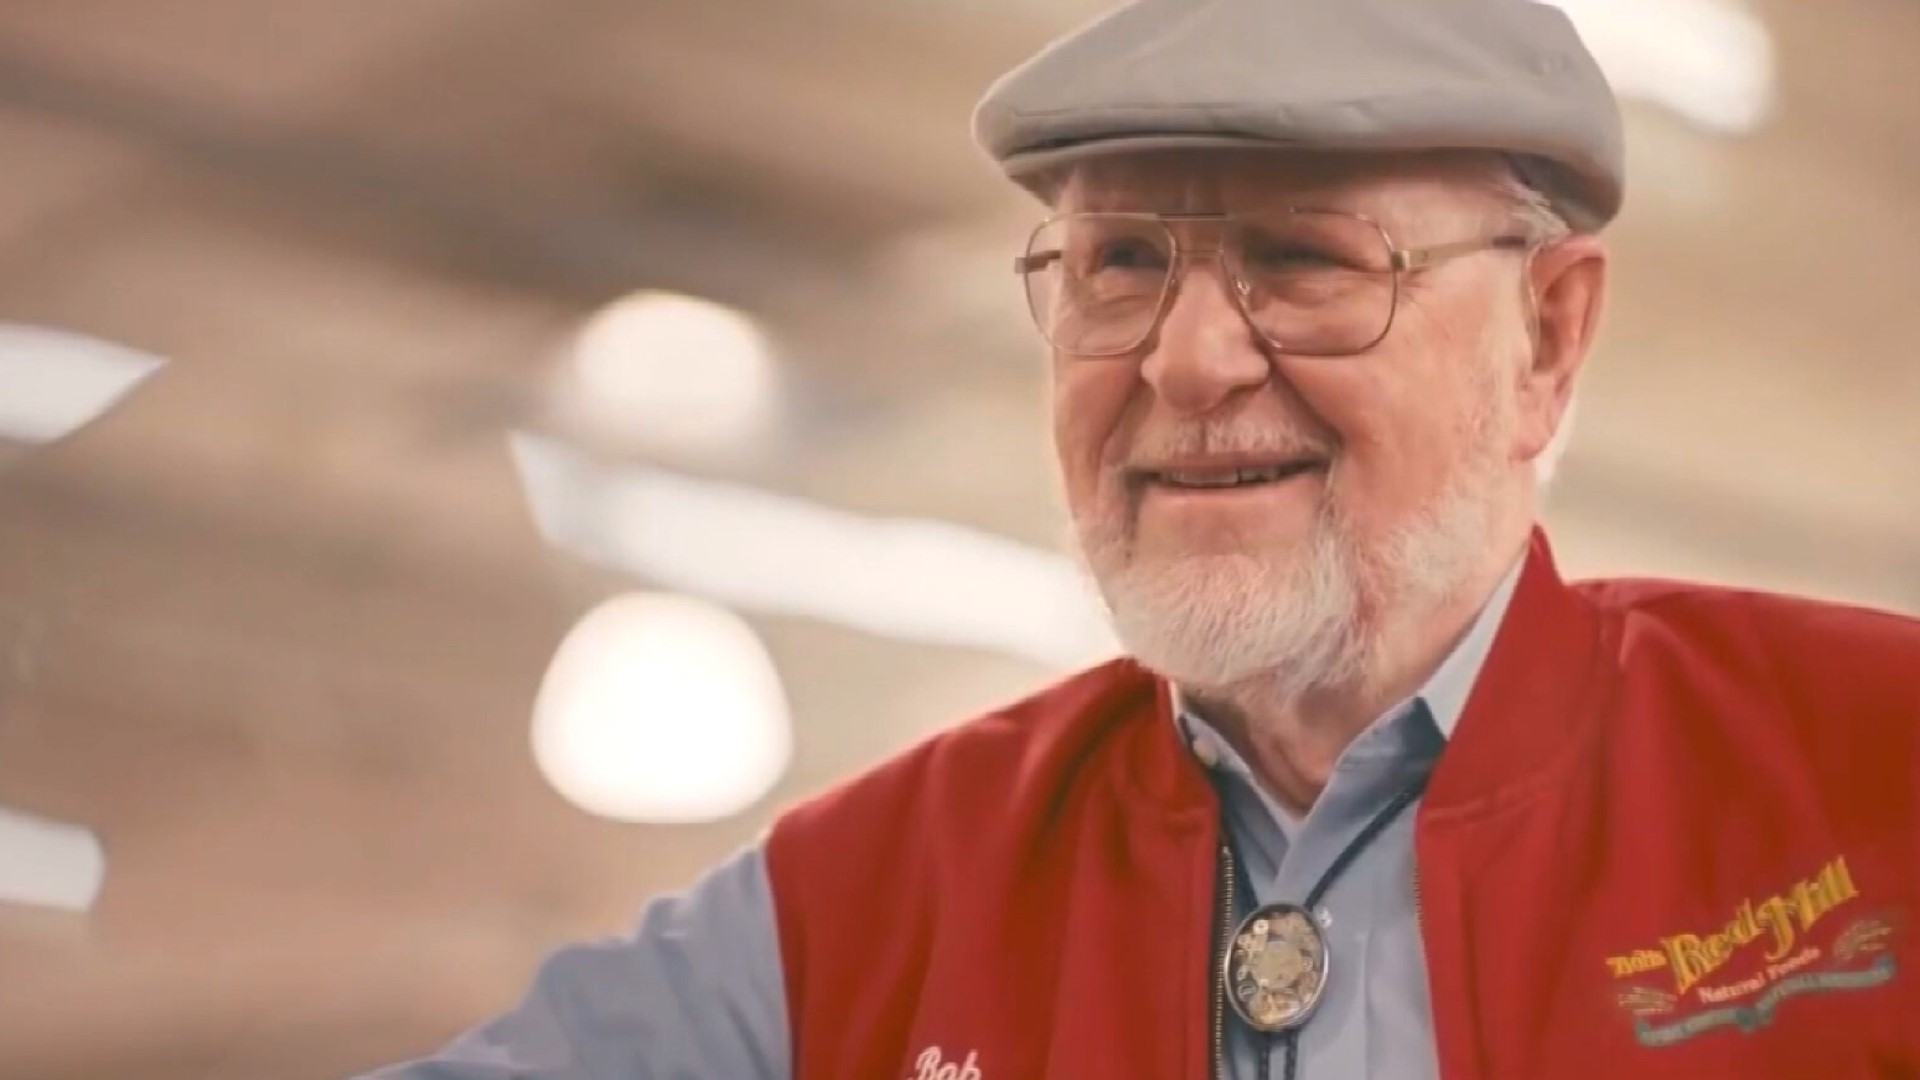 Bob Moore of Bob's Red Mill turned 94 on Feb. 15. He said he's been in the business for so long that he remembers talking with his friend and customer, Fred Meyer.